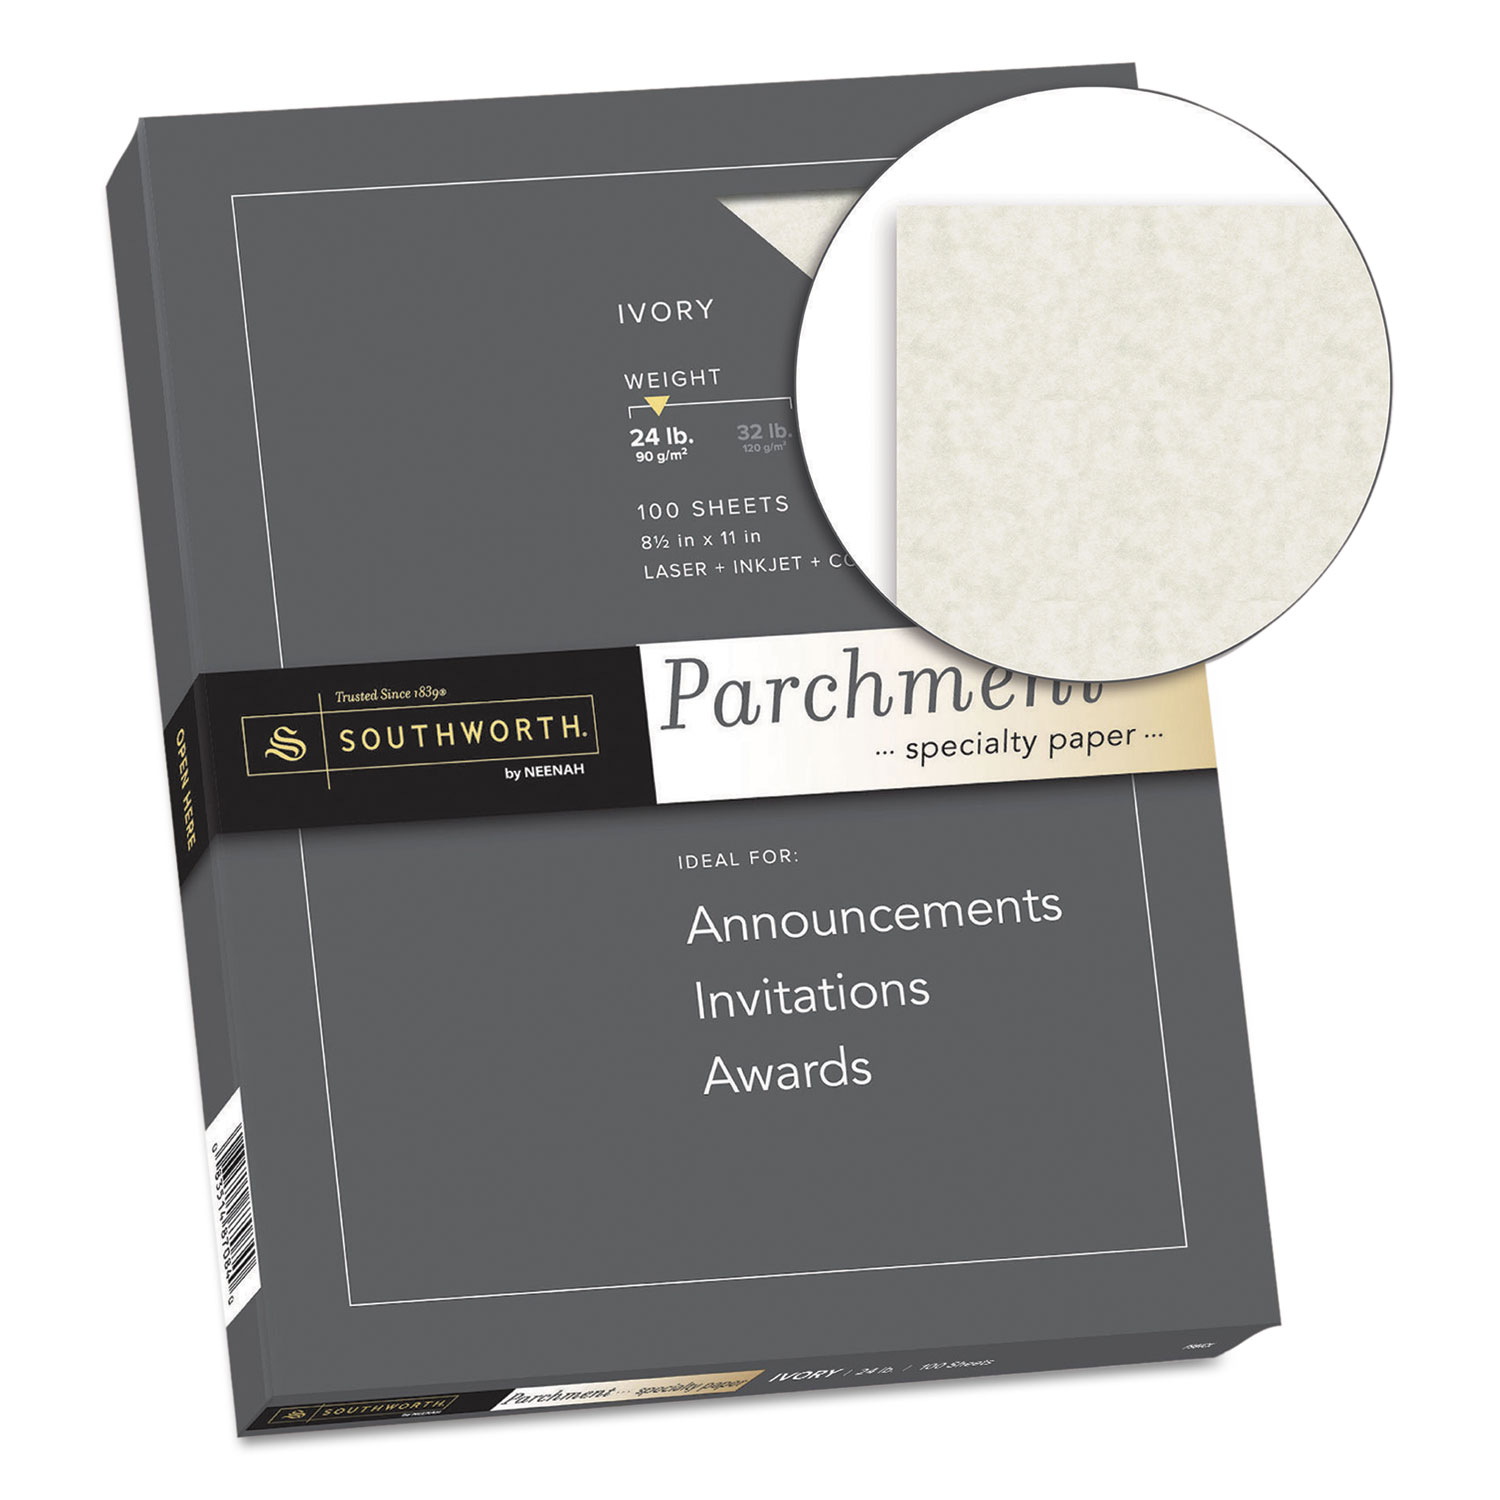 Parchment Specialty Paper, Ivory, 24lb, 8 1/2 x 11, 100 Sheets